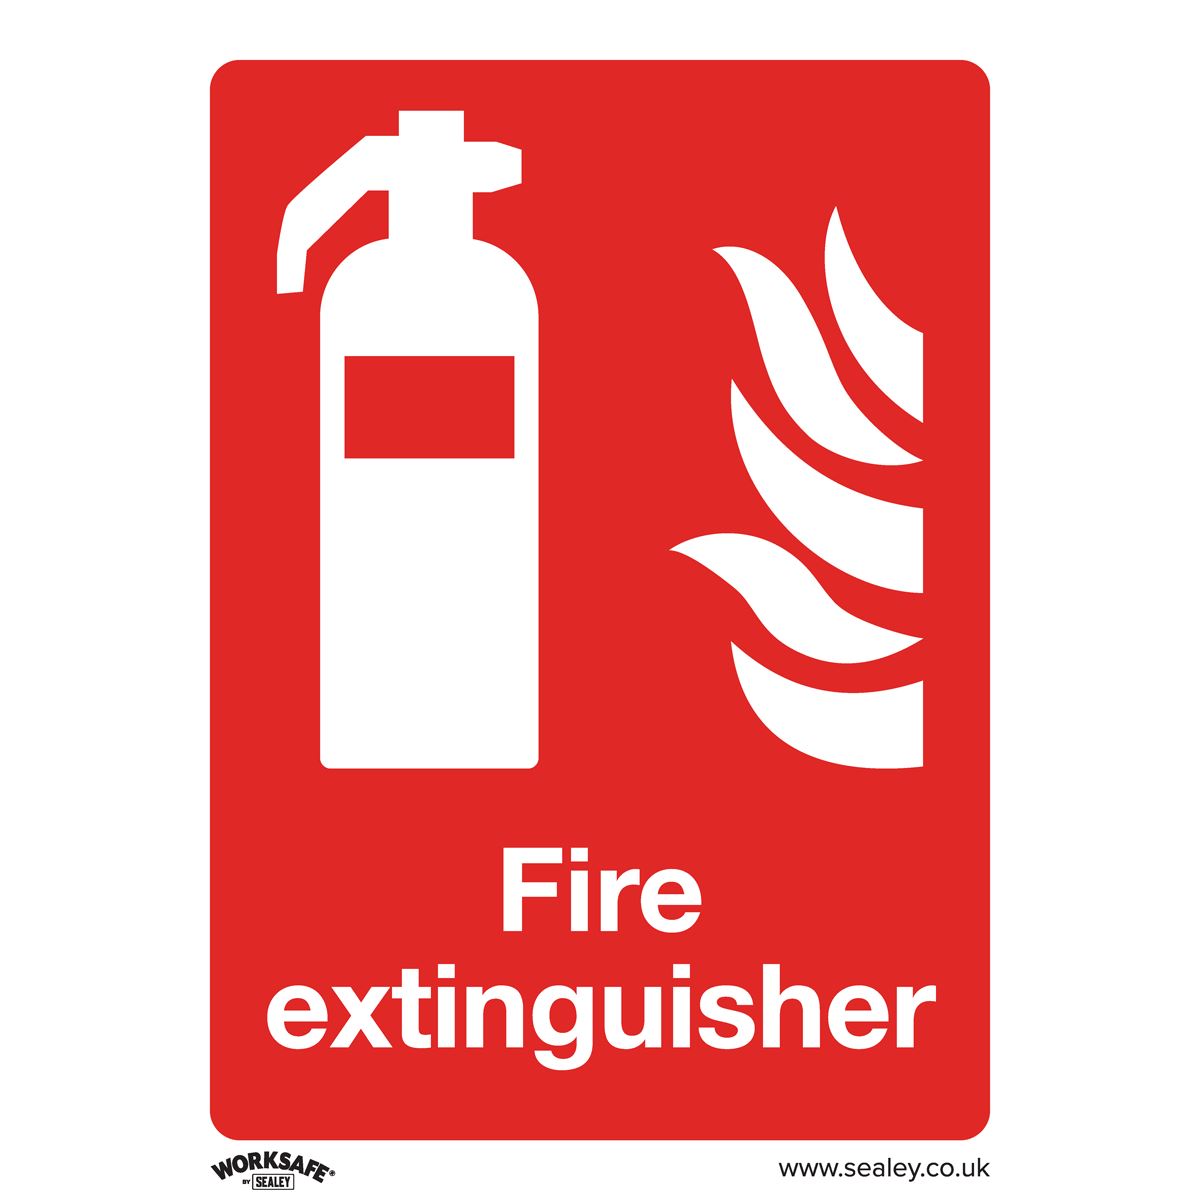 Worksafe by Sealey Information Safety Sign - Fire Extinguisher - Rigid Plastic - Pack of 10